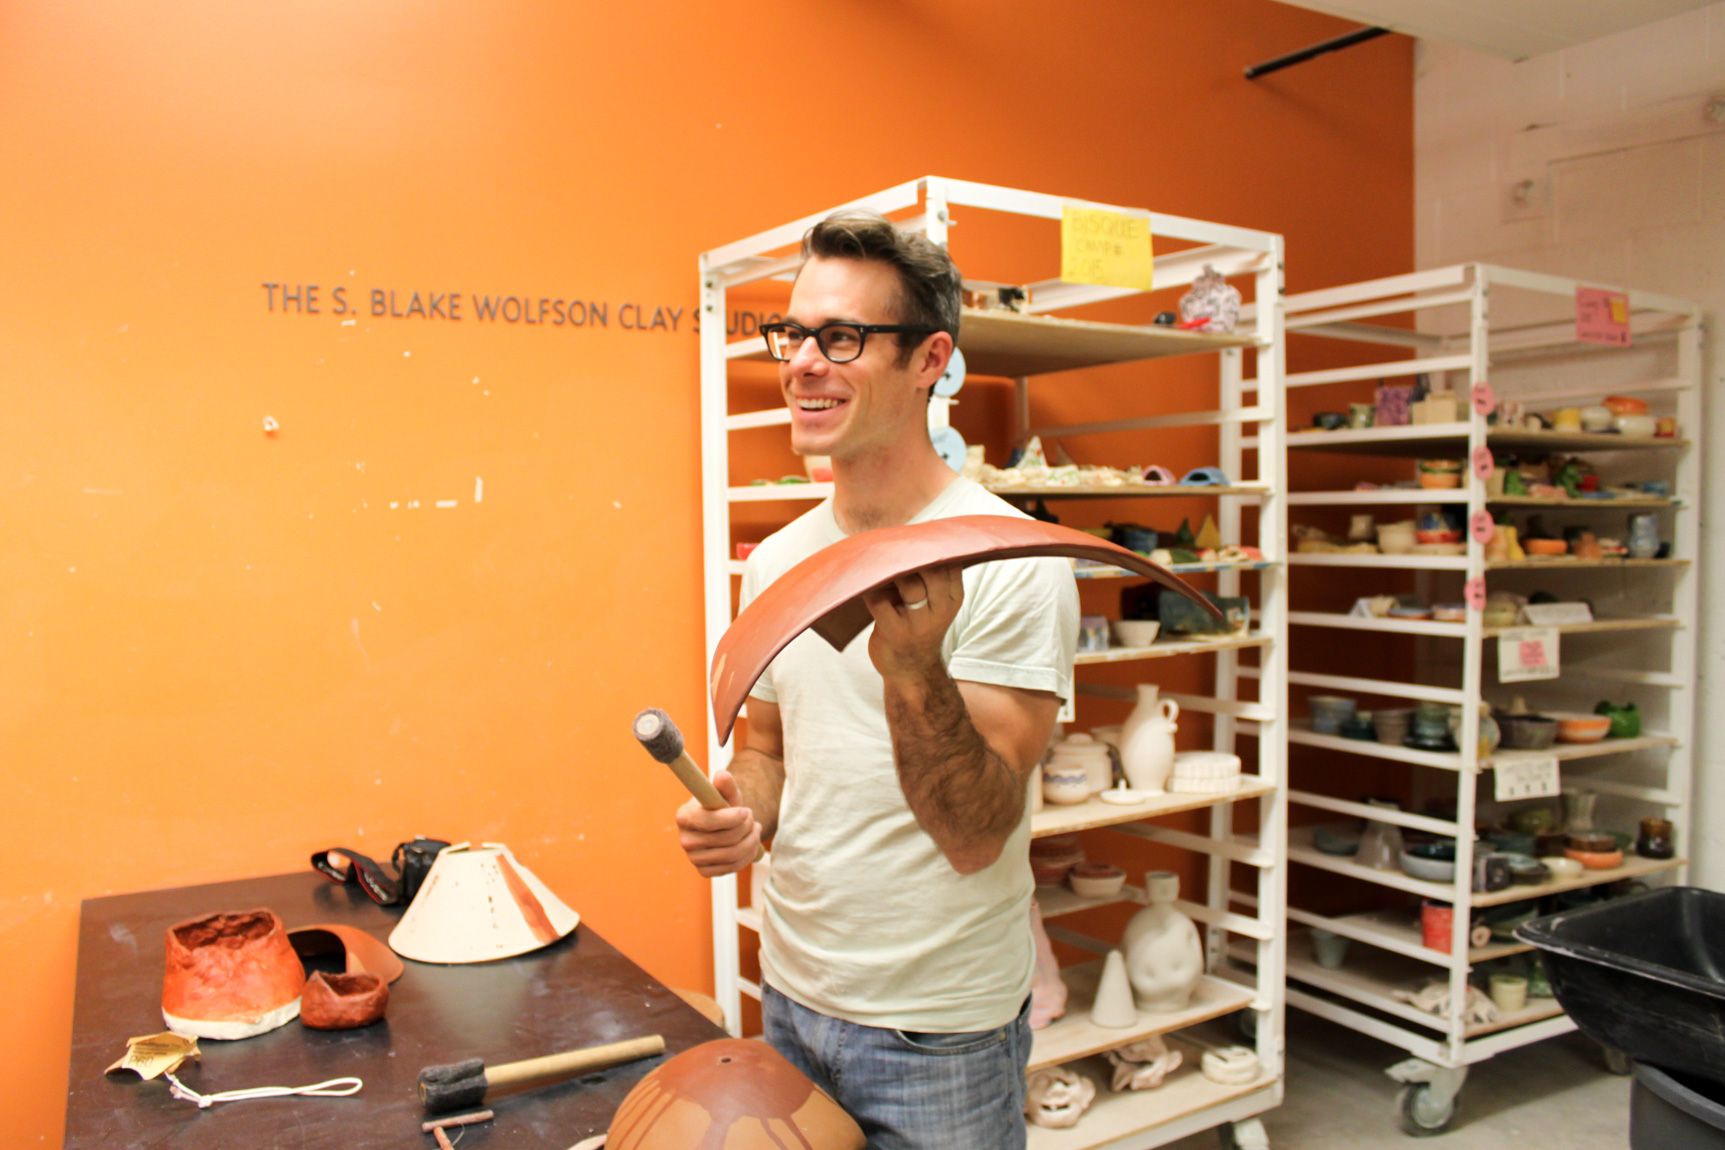 Kallmyer in his studio, smiling and holding a long, rectangular clay instrument in his left hand, and a felted mallet in his right.